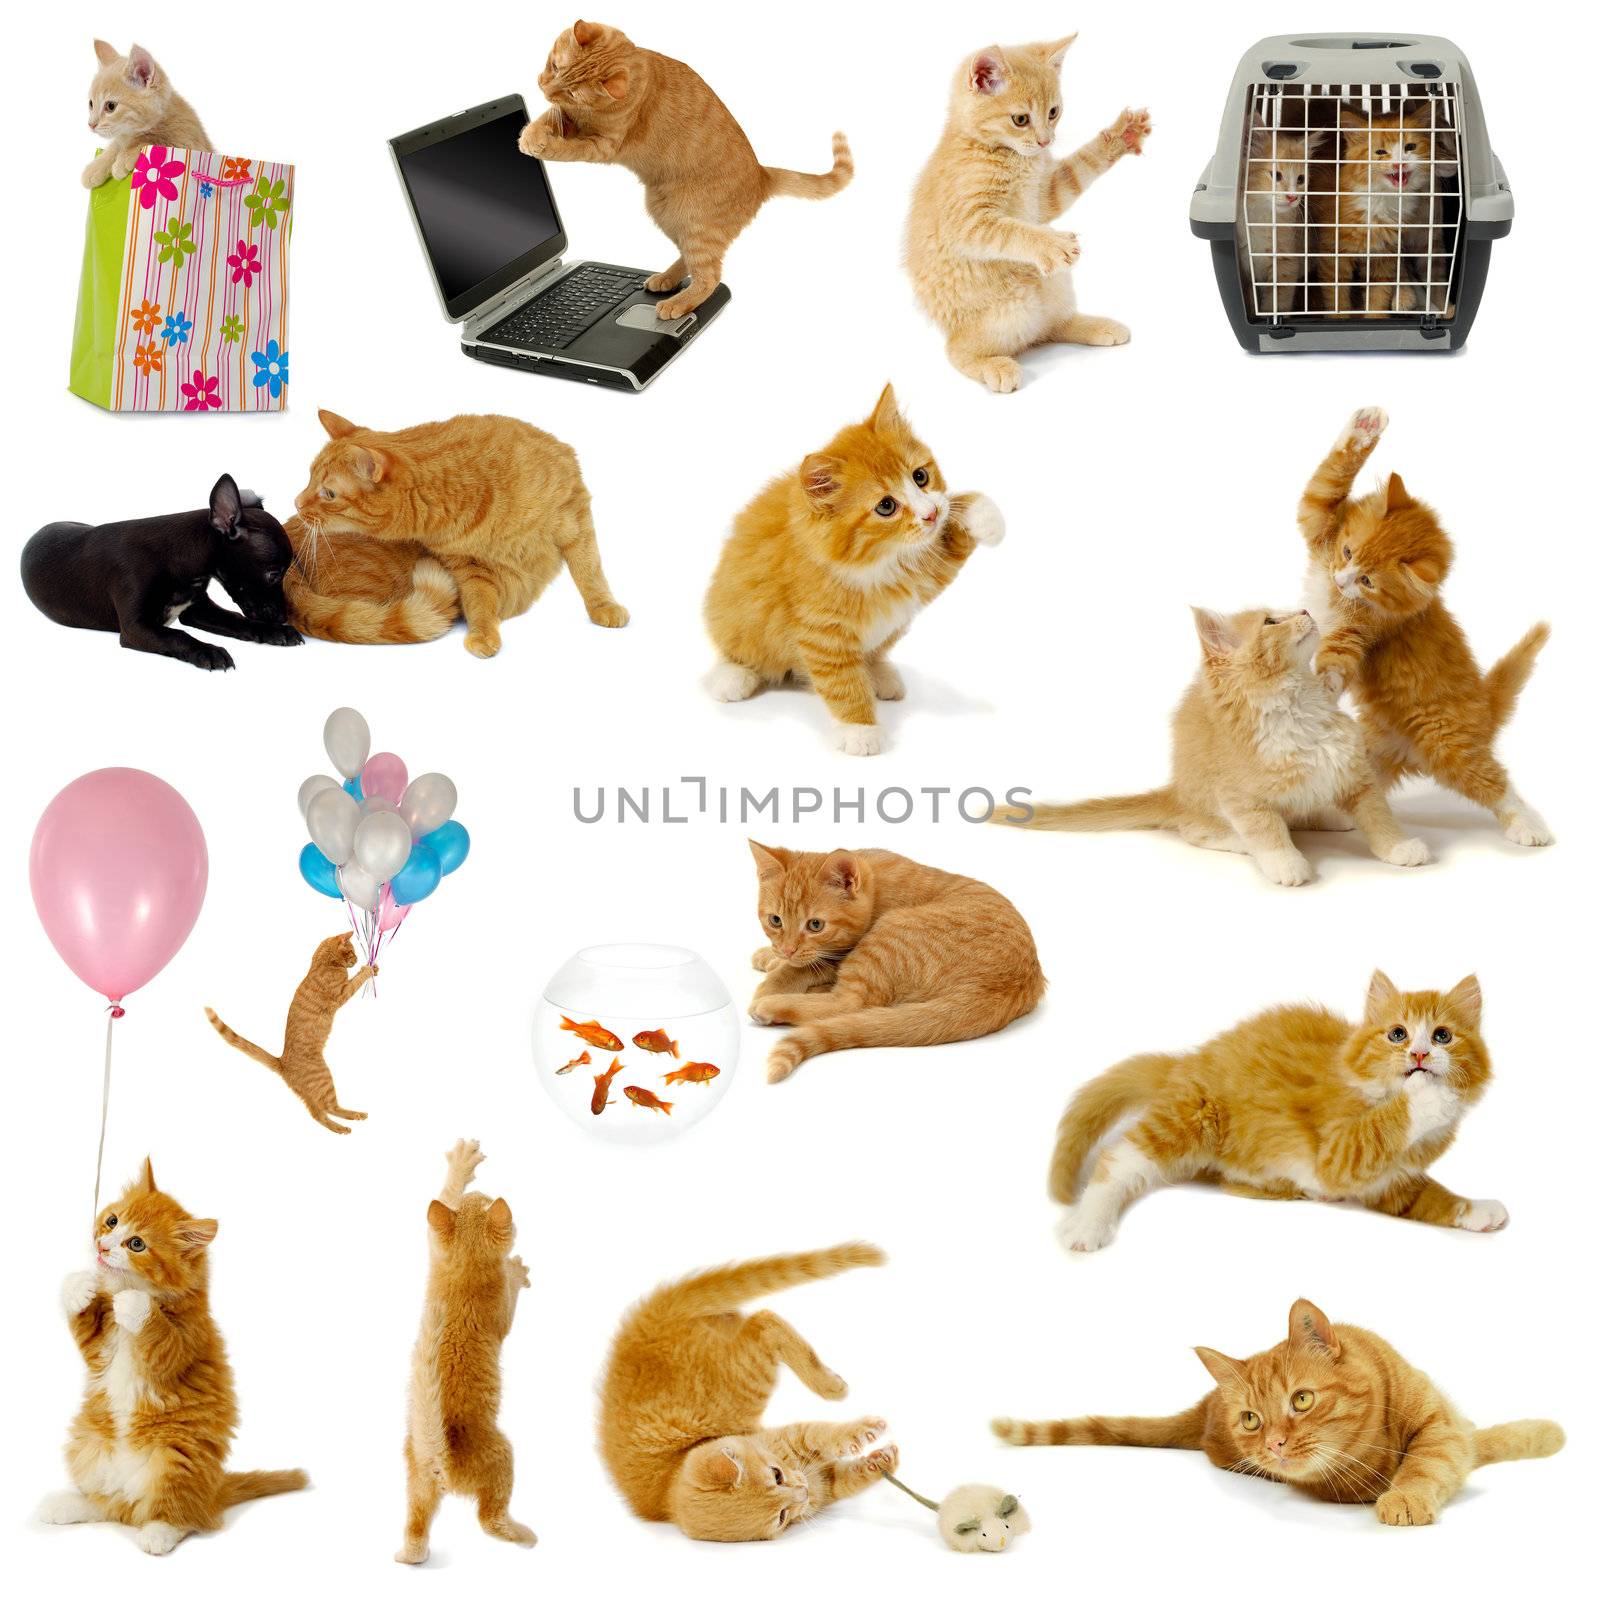 Cat collection isolated on white background. The cats are with laptop, dog, balloons, goldfish and mouse.